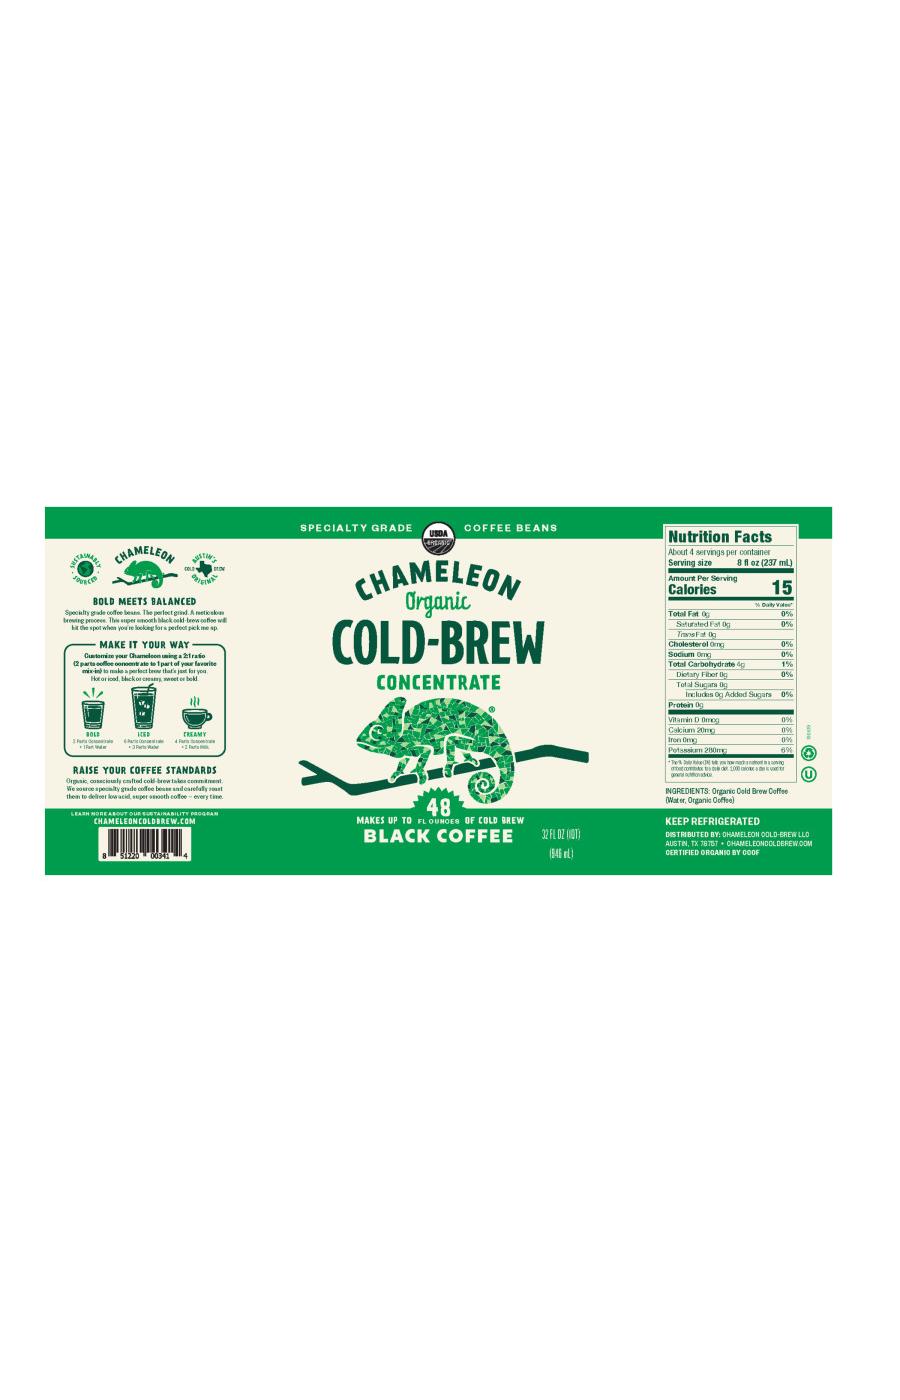 Chameleon Organic Cold Brew Concentrate Black Coffee; image 3 of 8